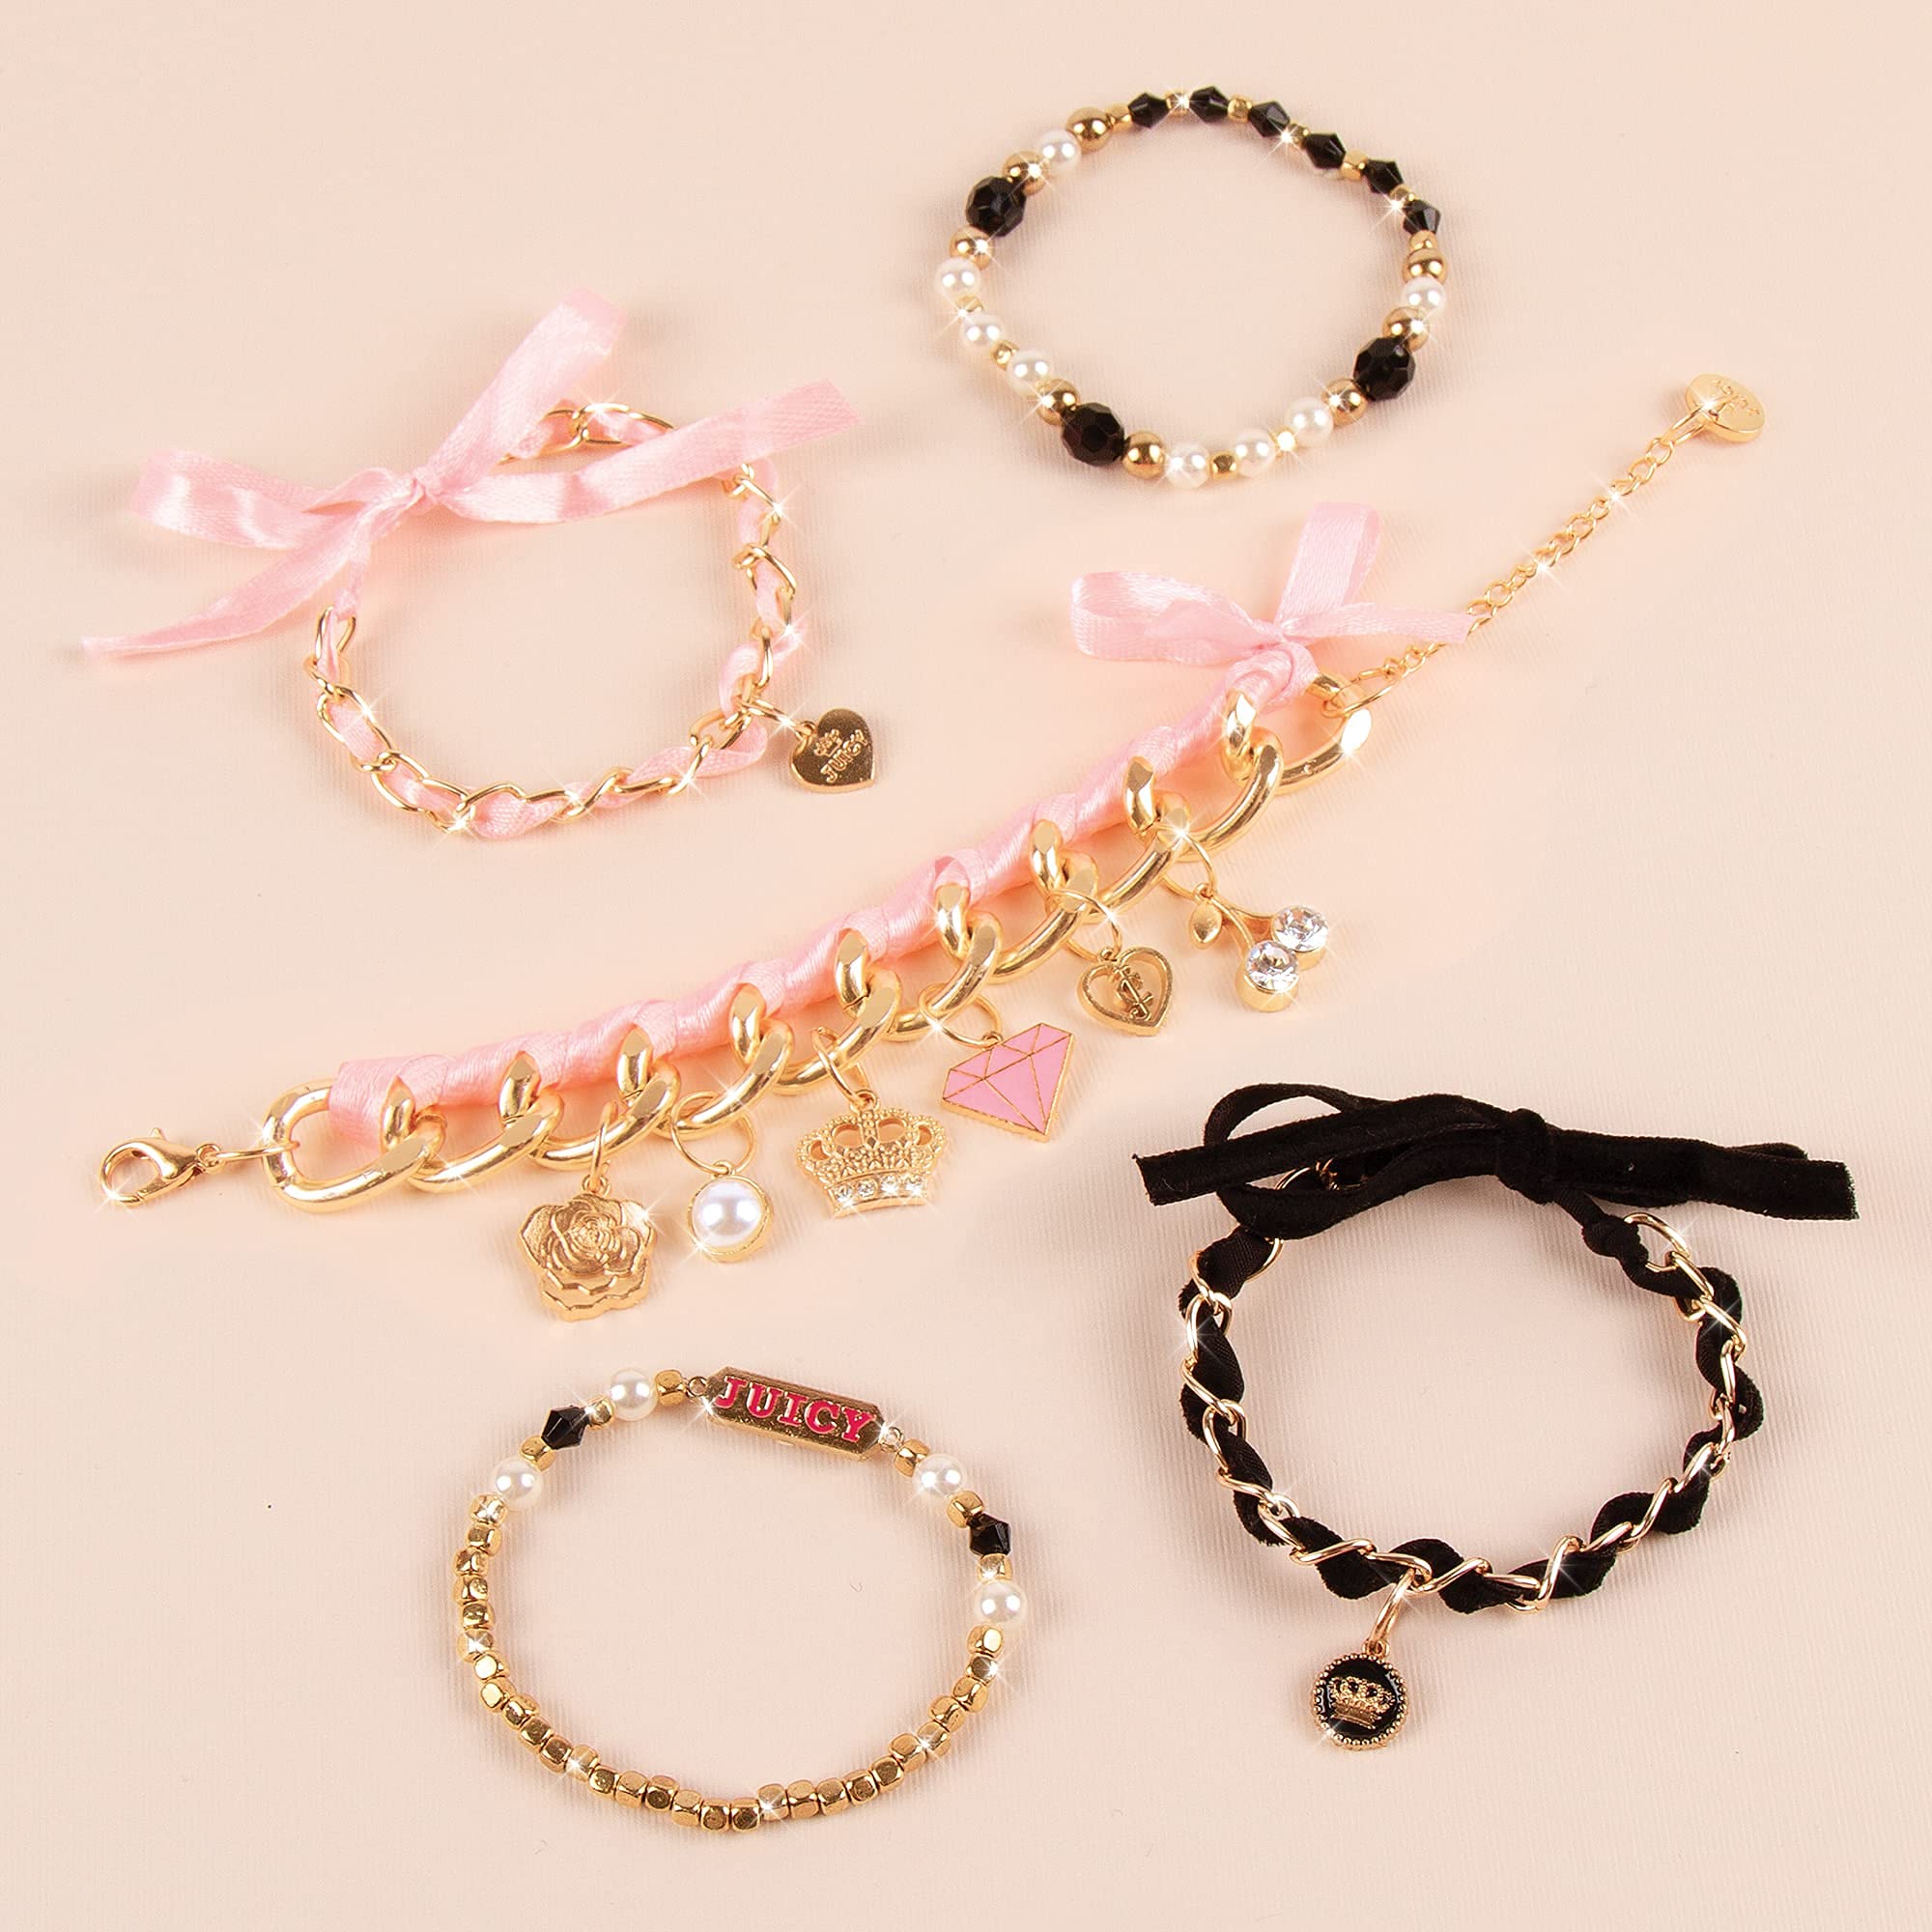 Make It Real - Juicy Couture Mini Chains and Charms - DIY Charm Bracelet Making Kit - Friendship Bracelet Kit with Charms, Beads & Cords - Arts & Crafts Bead Kit for Girls - Make 5 Bracelets